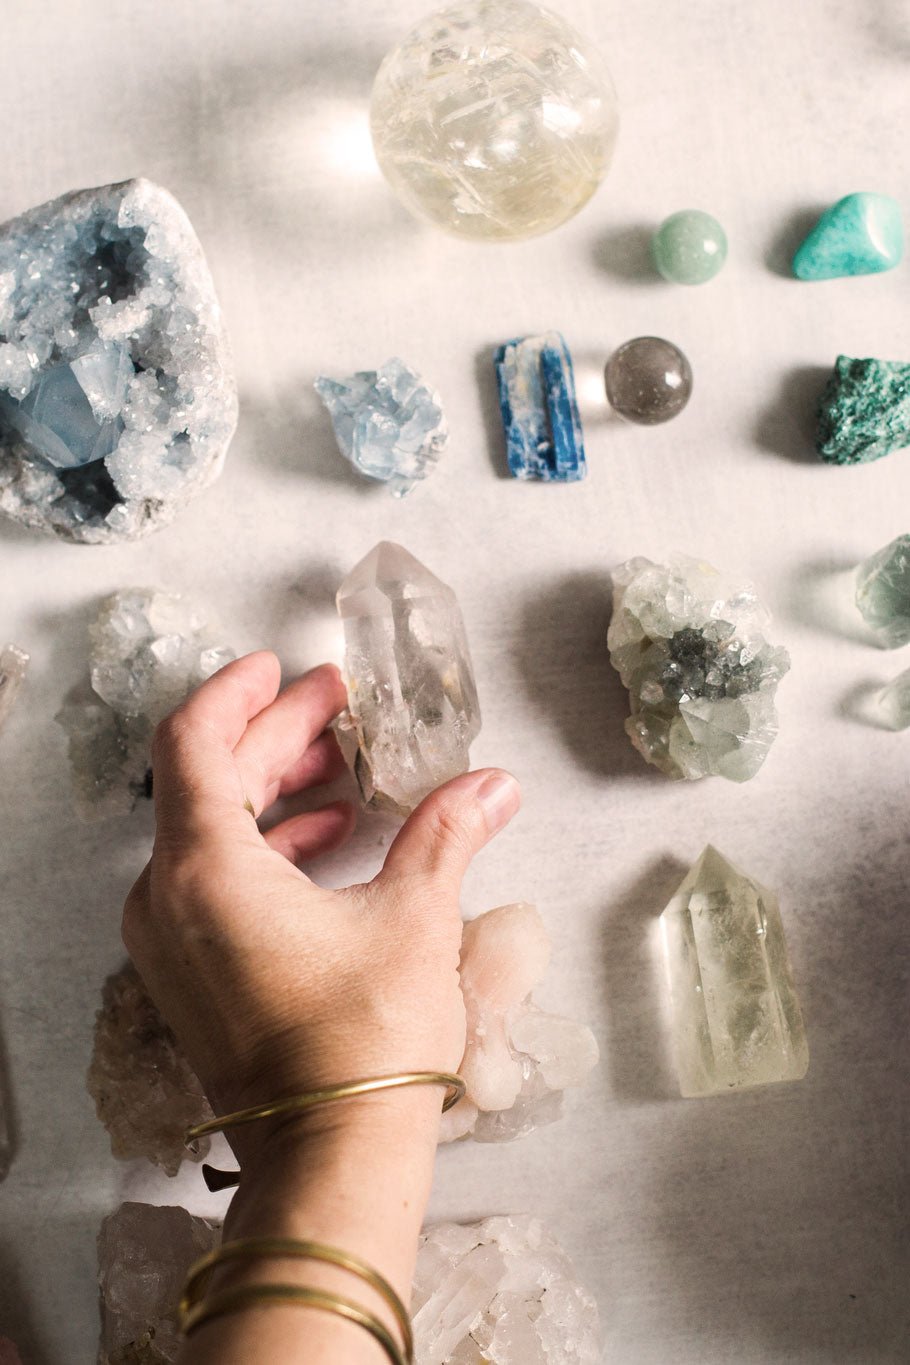 How to use quartz crystals for healing and how to choose the right crystal